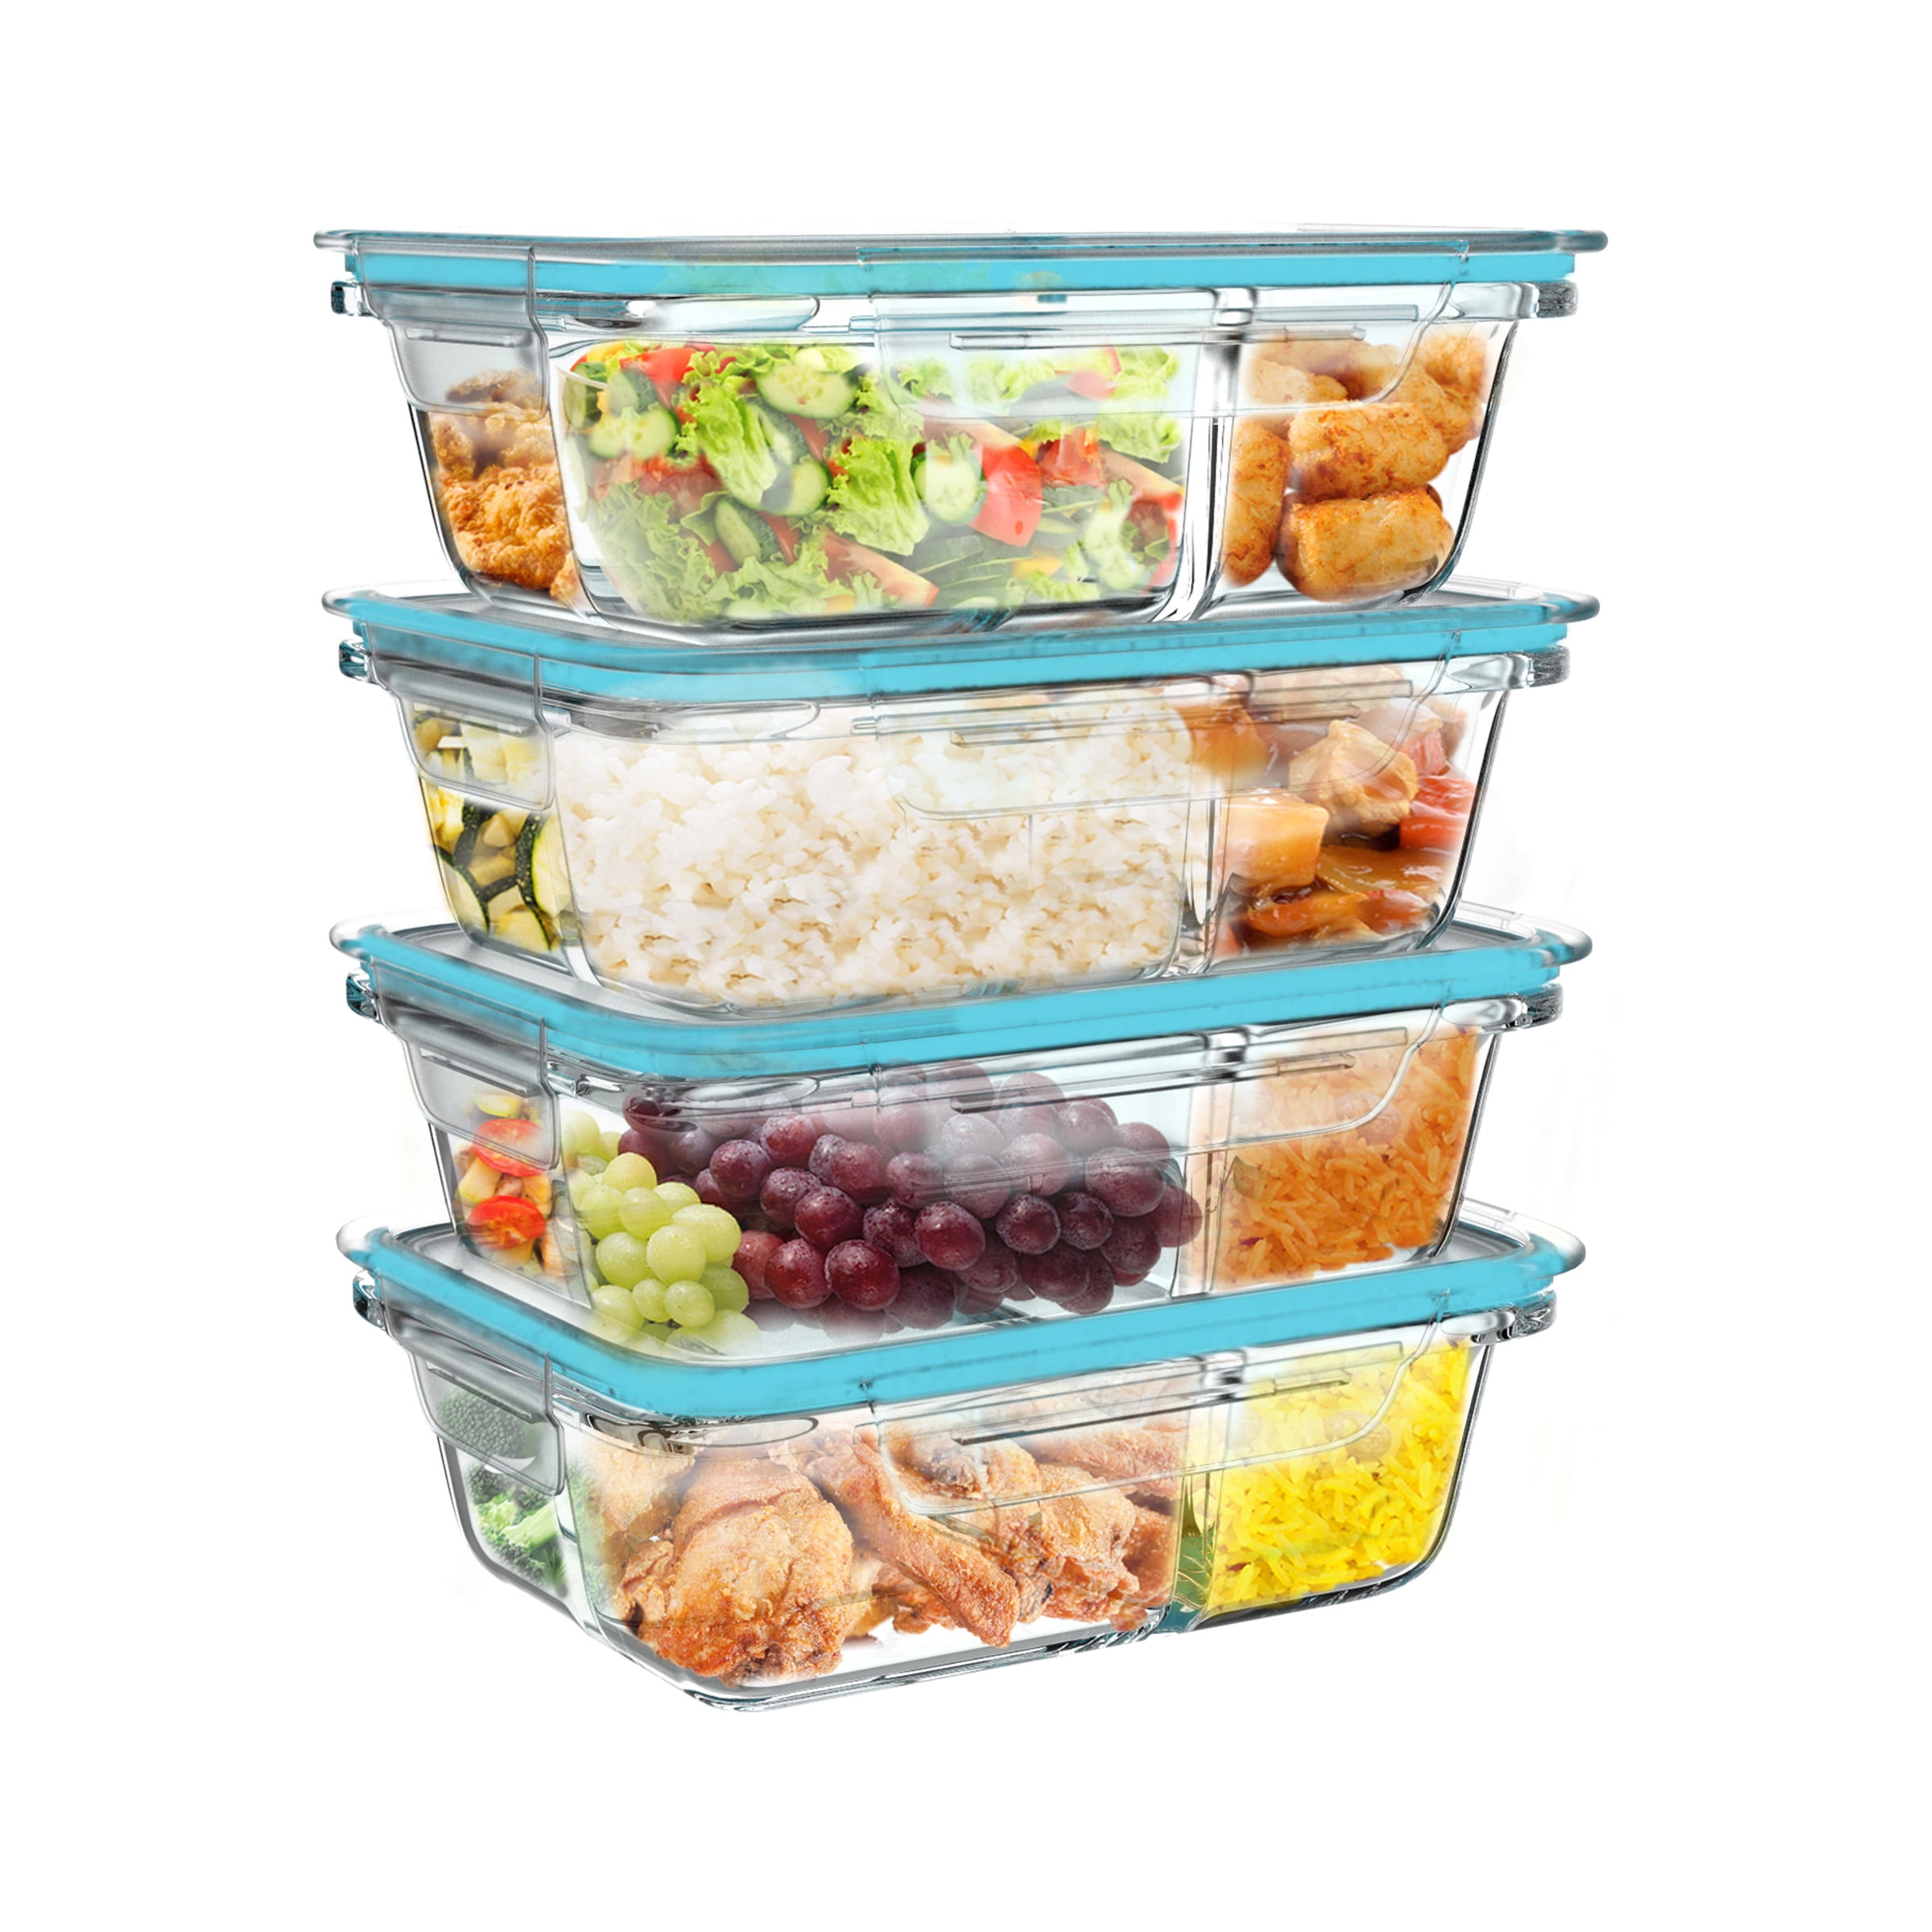  X.SSTTXN 3-Cup/24 Ounce Glass Food Storage Containers